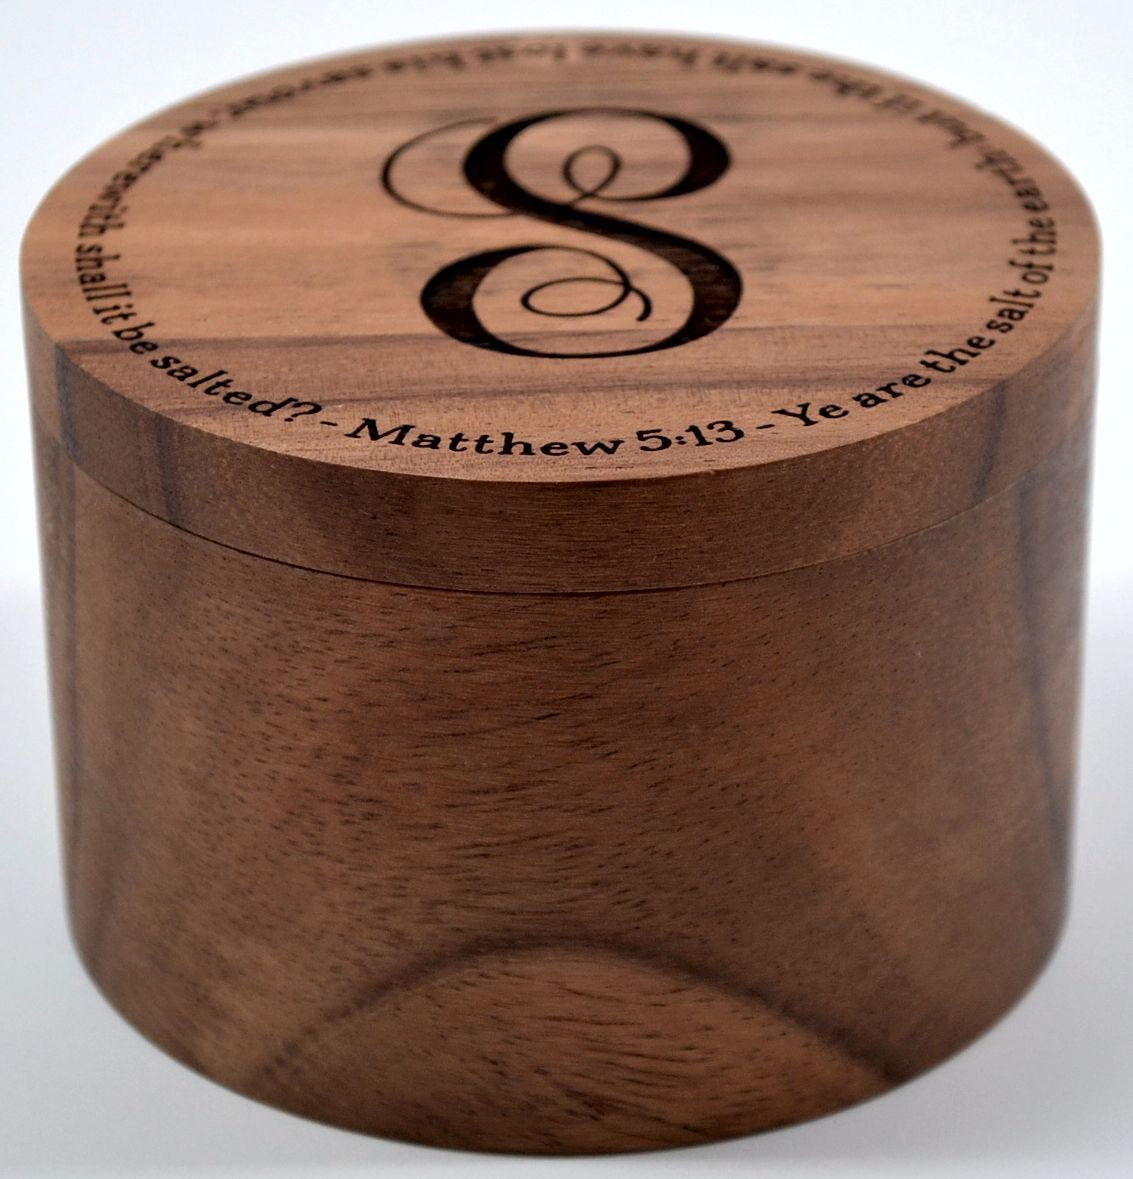 Personalized Acacia Wood Salt Keeper with Swivel Cover - Engraved - Monogramming Included in Price